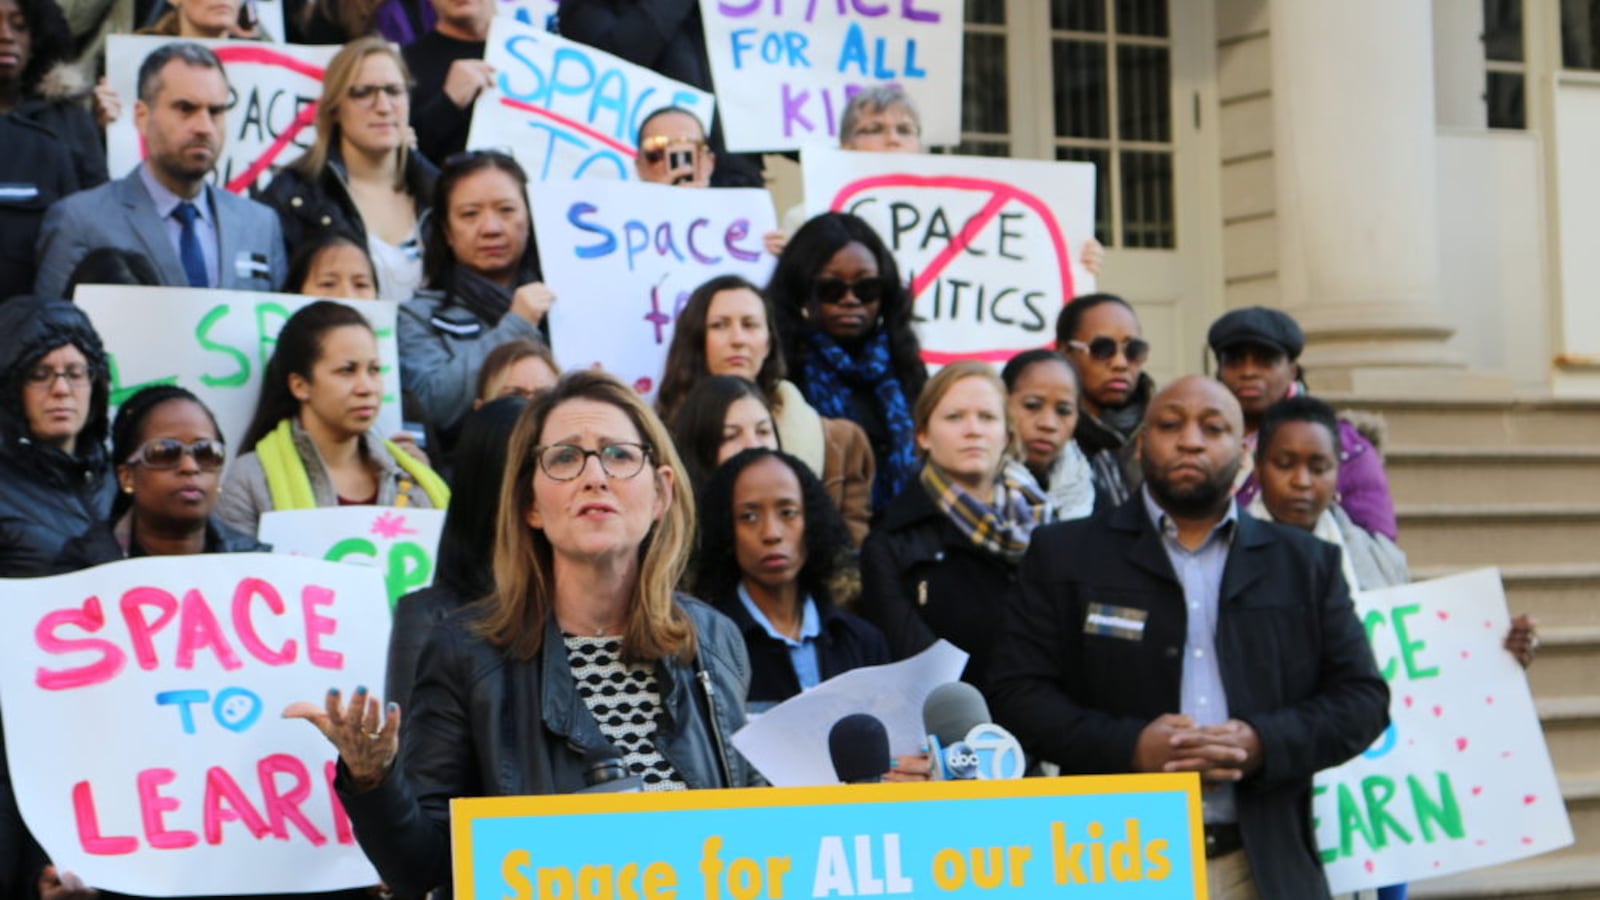 Success Academy CEO Eva Moskowitz held a press conference in November 2017 at City Hall to call for more school space.